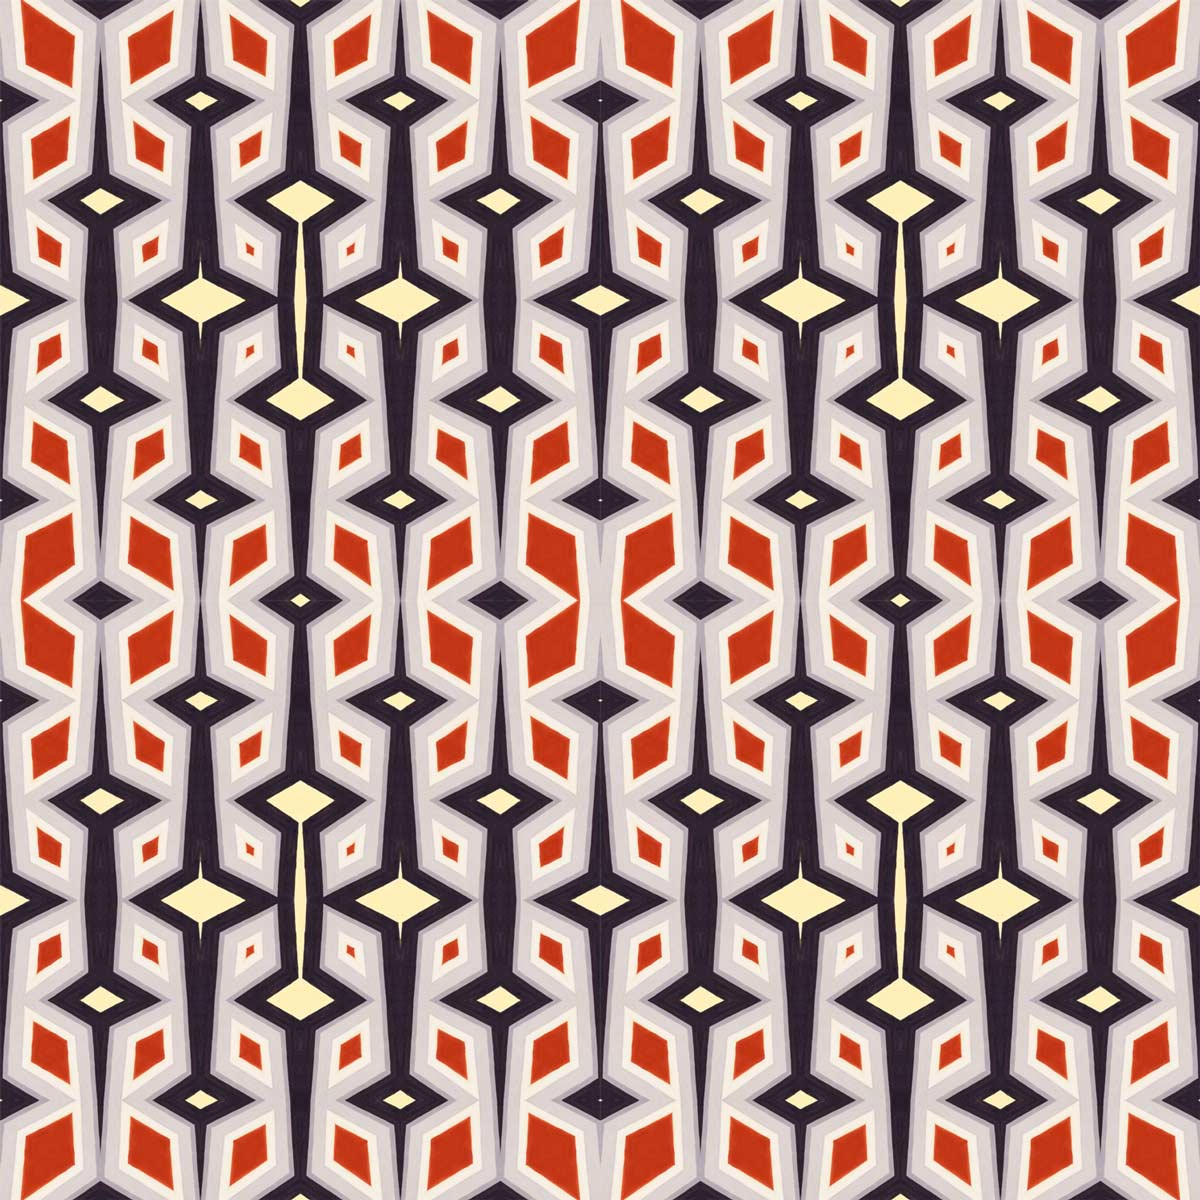 Tutorial: Make your morphing patterns repeatable